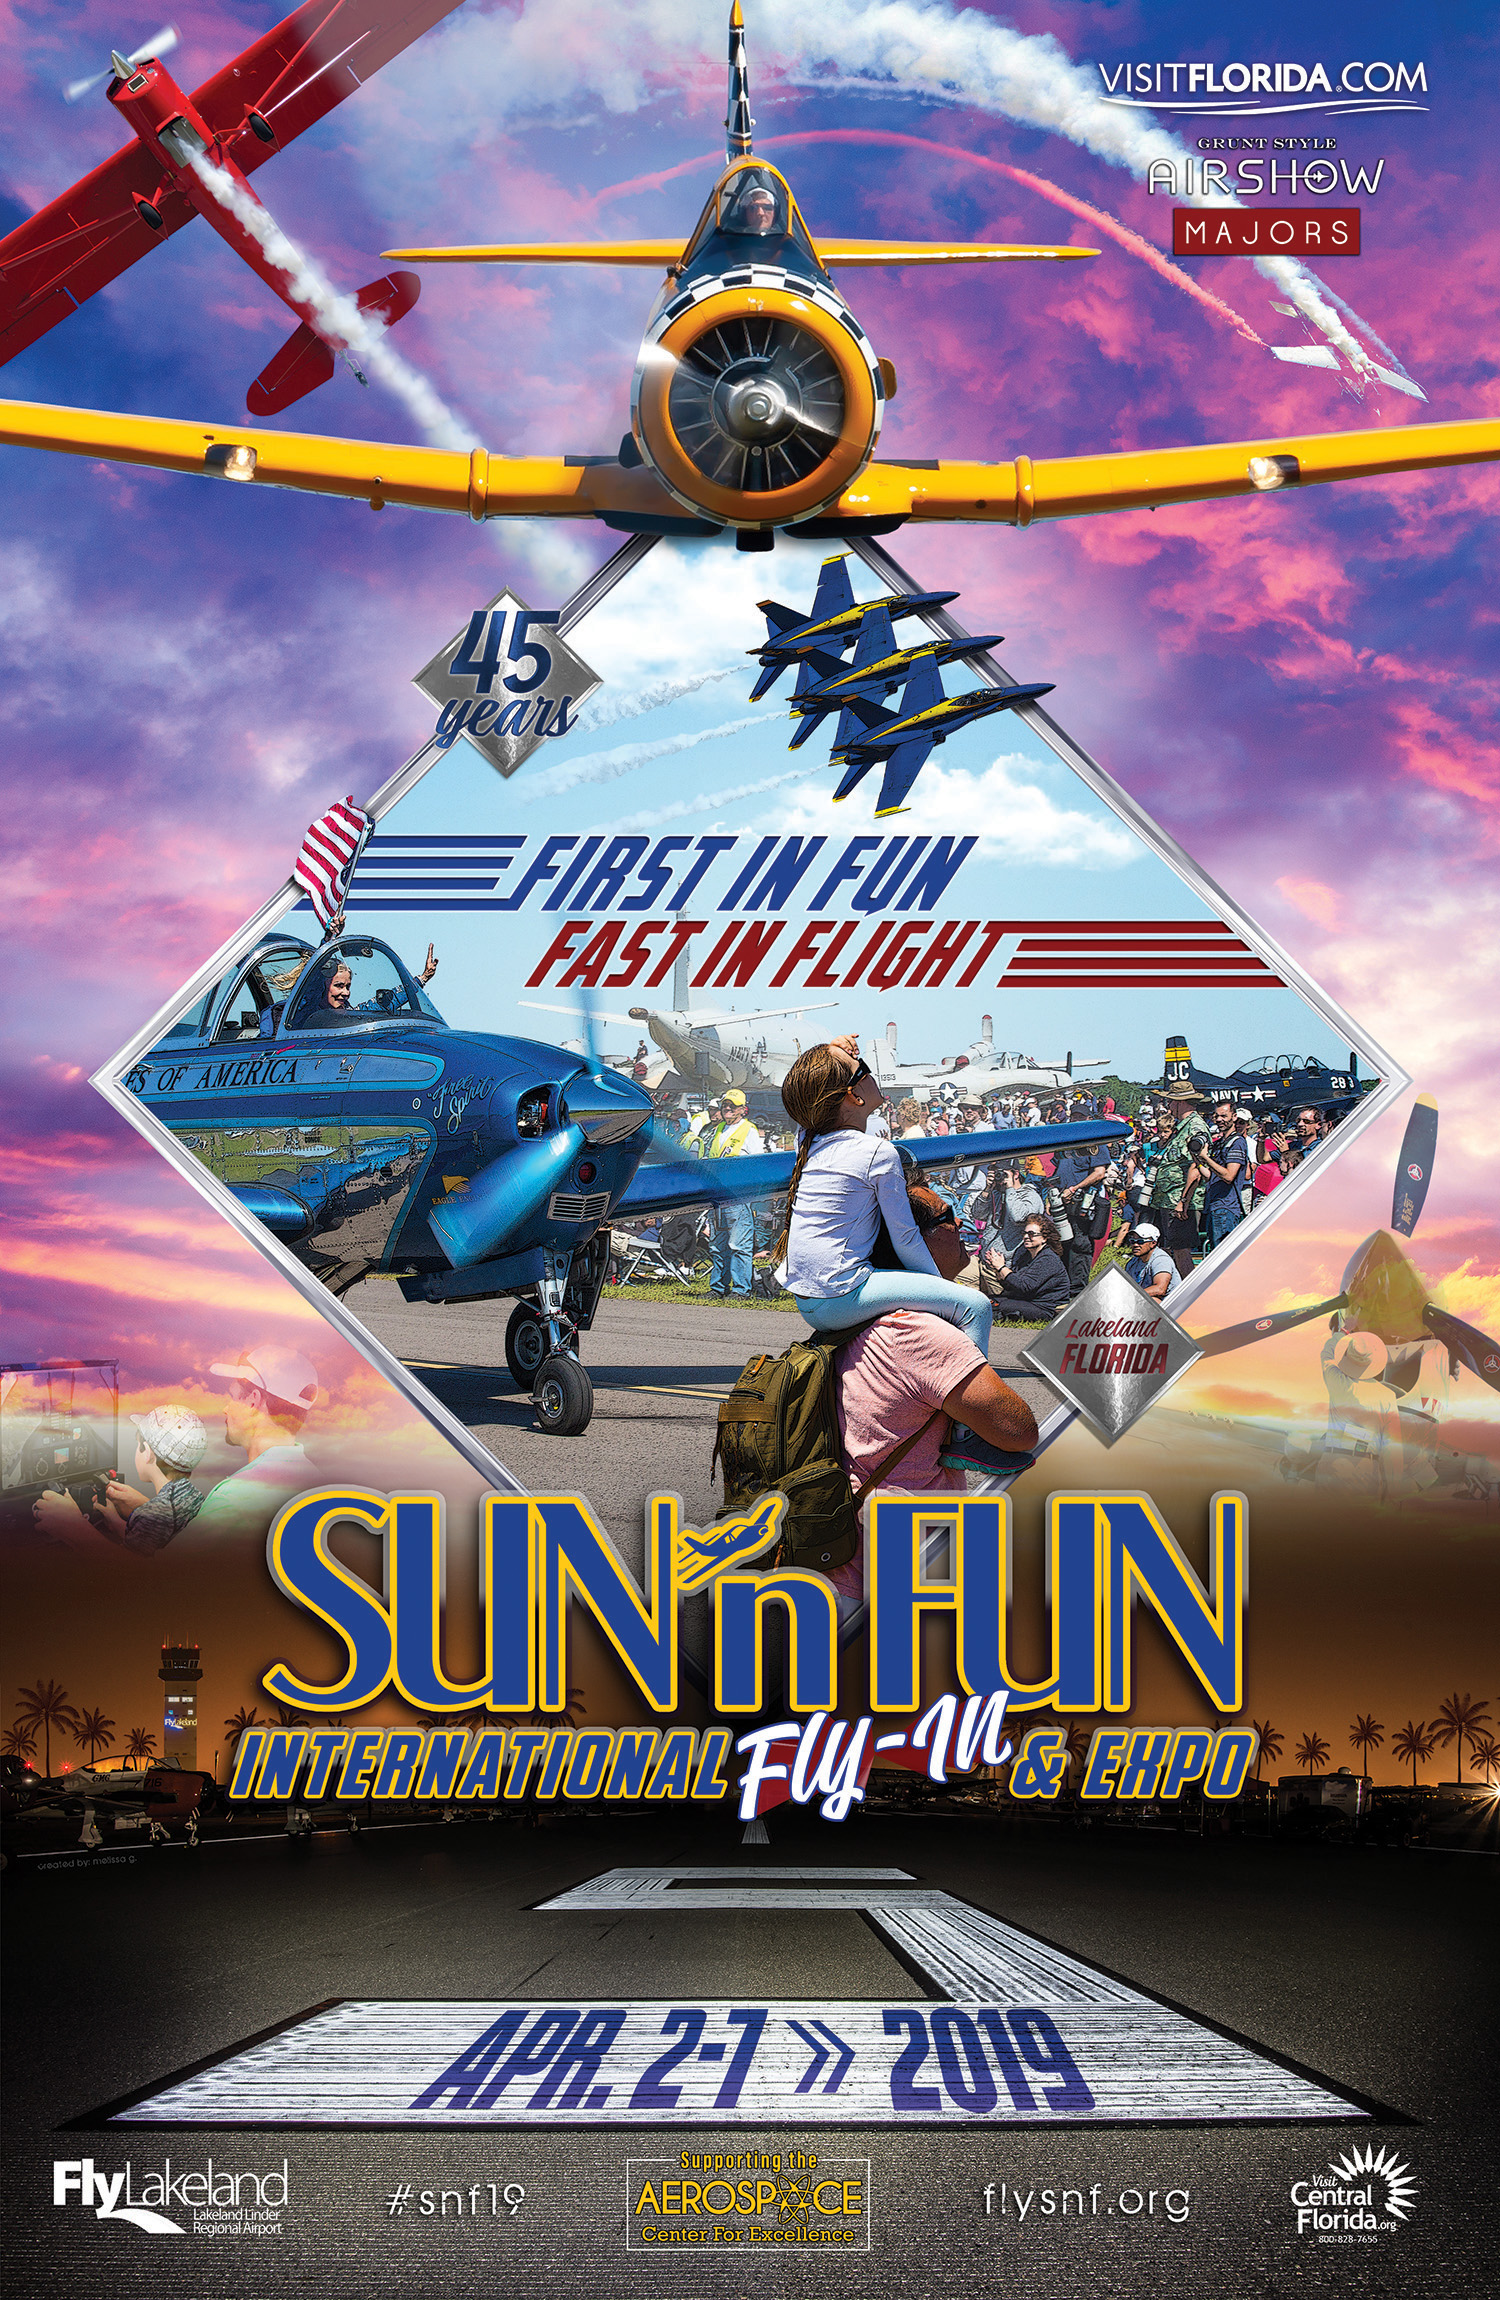 SUN 'n FUN Int'l Fly-In Expo - Abril 2 - 7, 2019